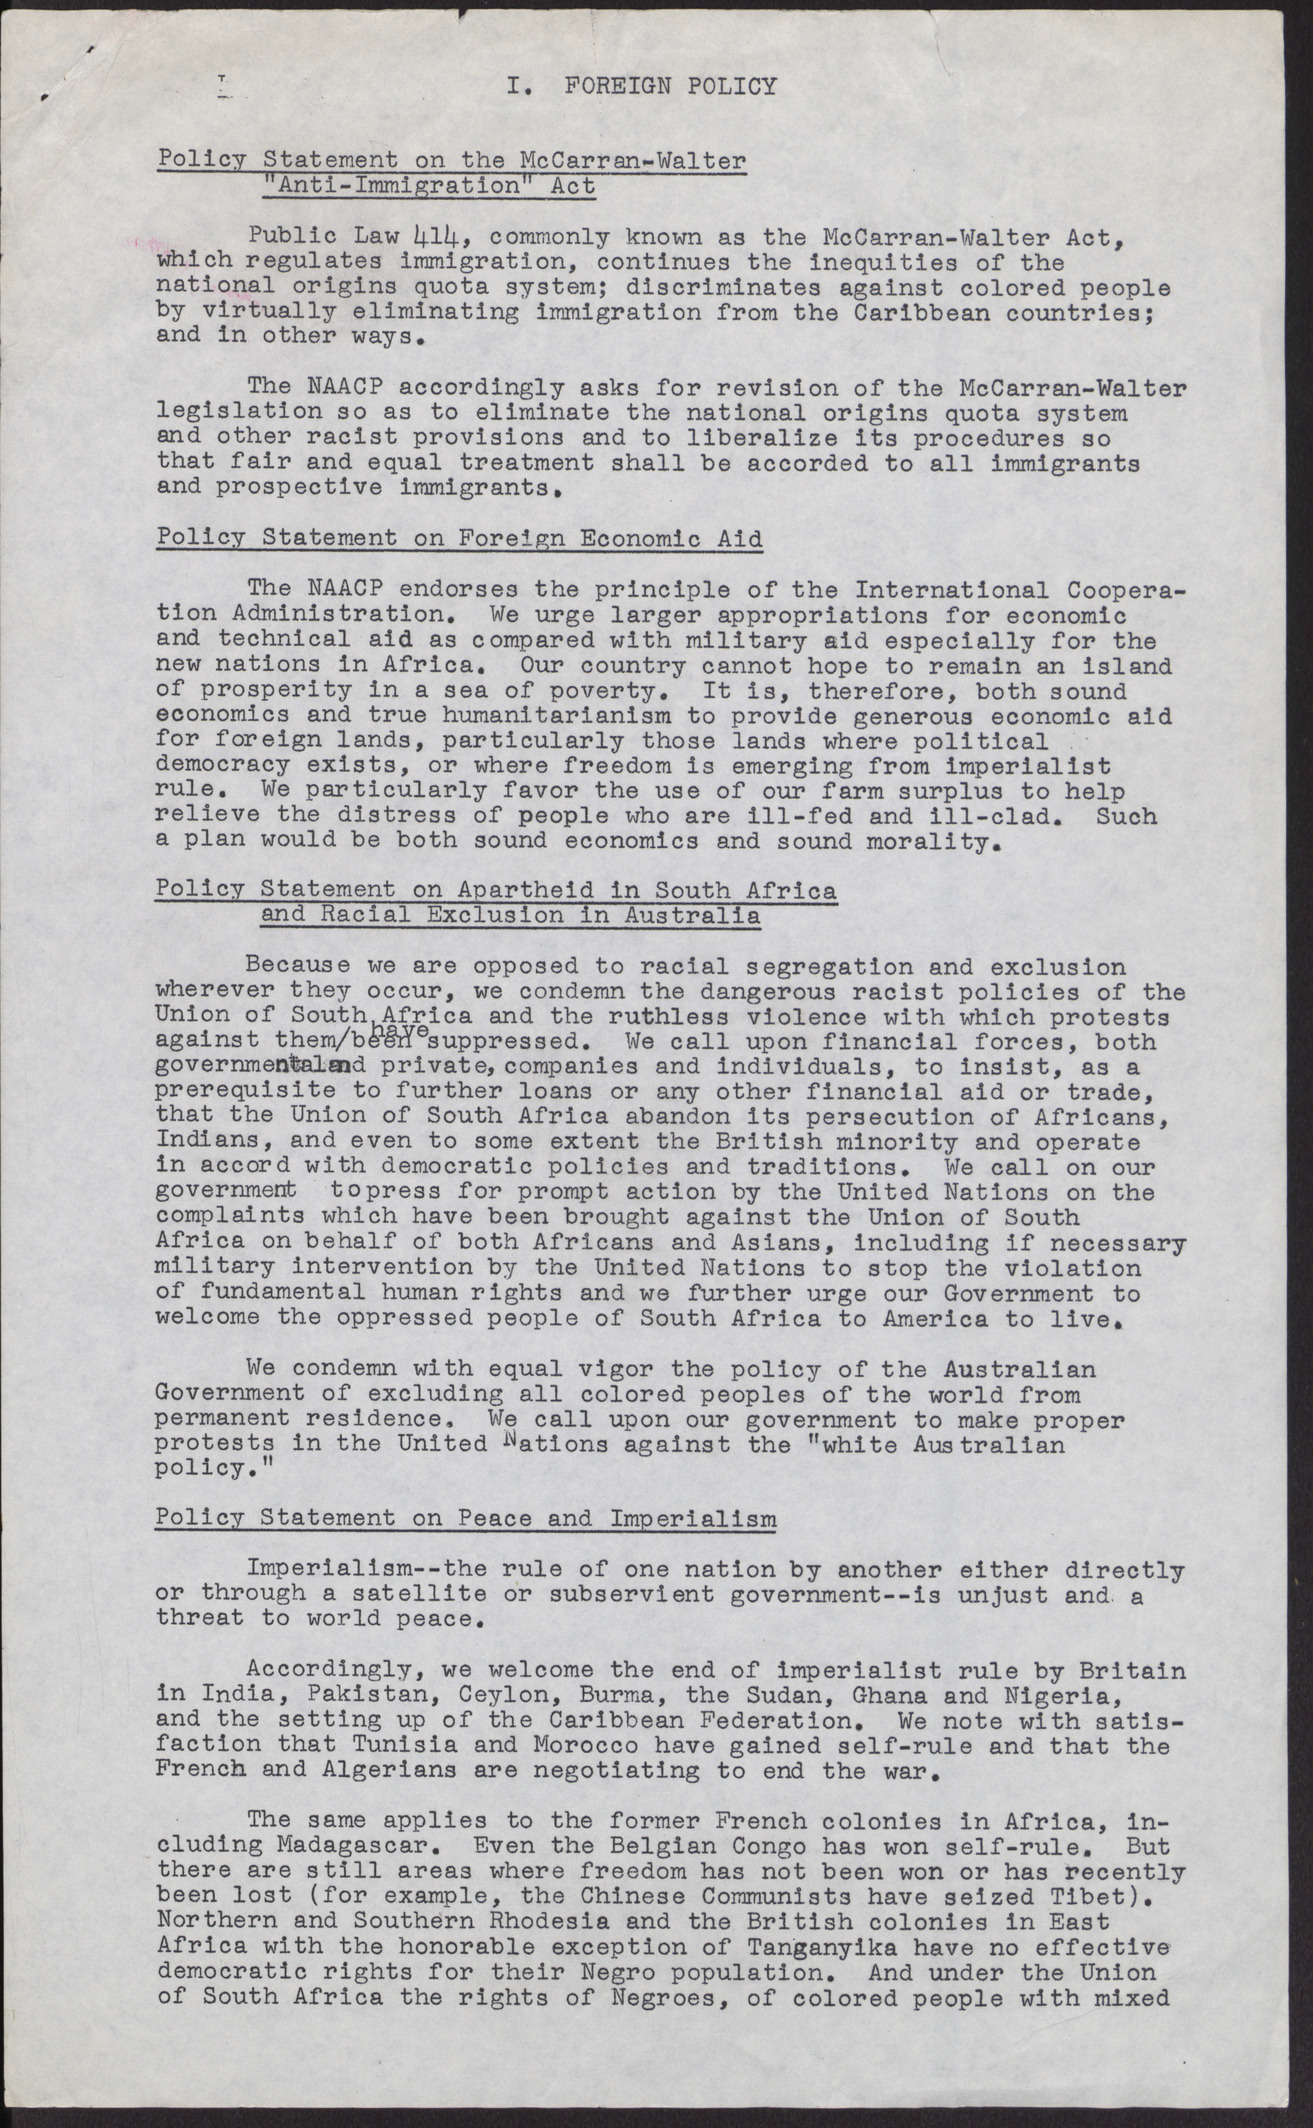 NAACP resolutions and statements of policy (3 pages), June 21-26, 1960, page 2